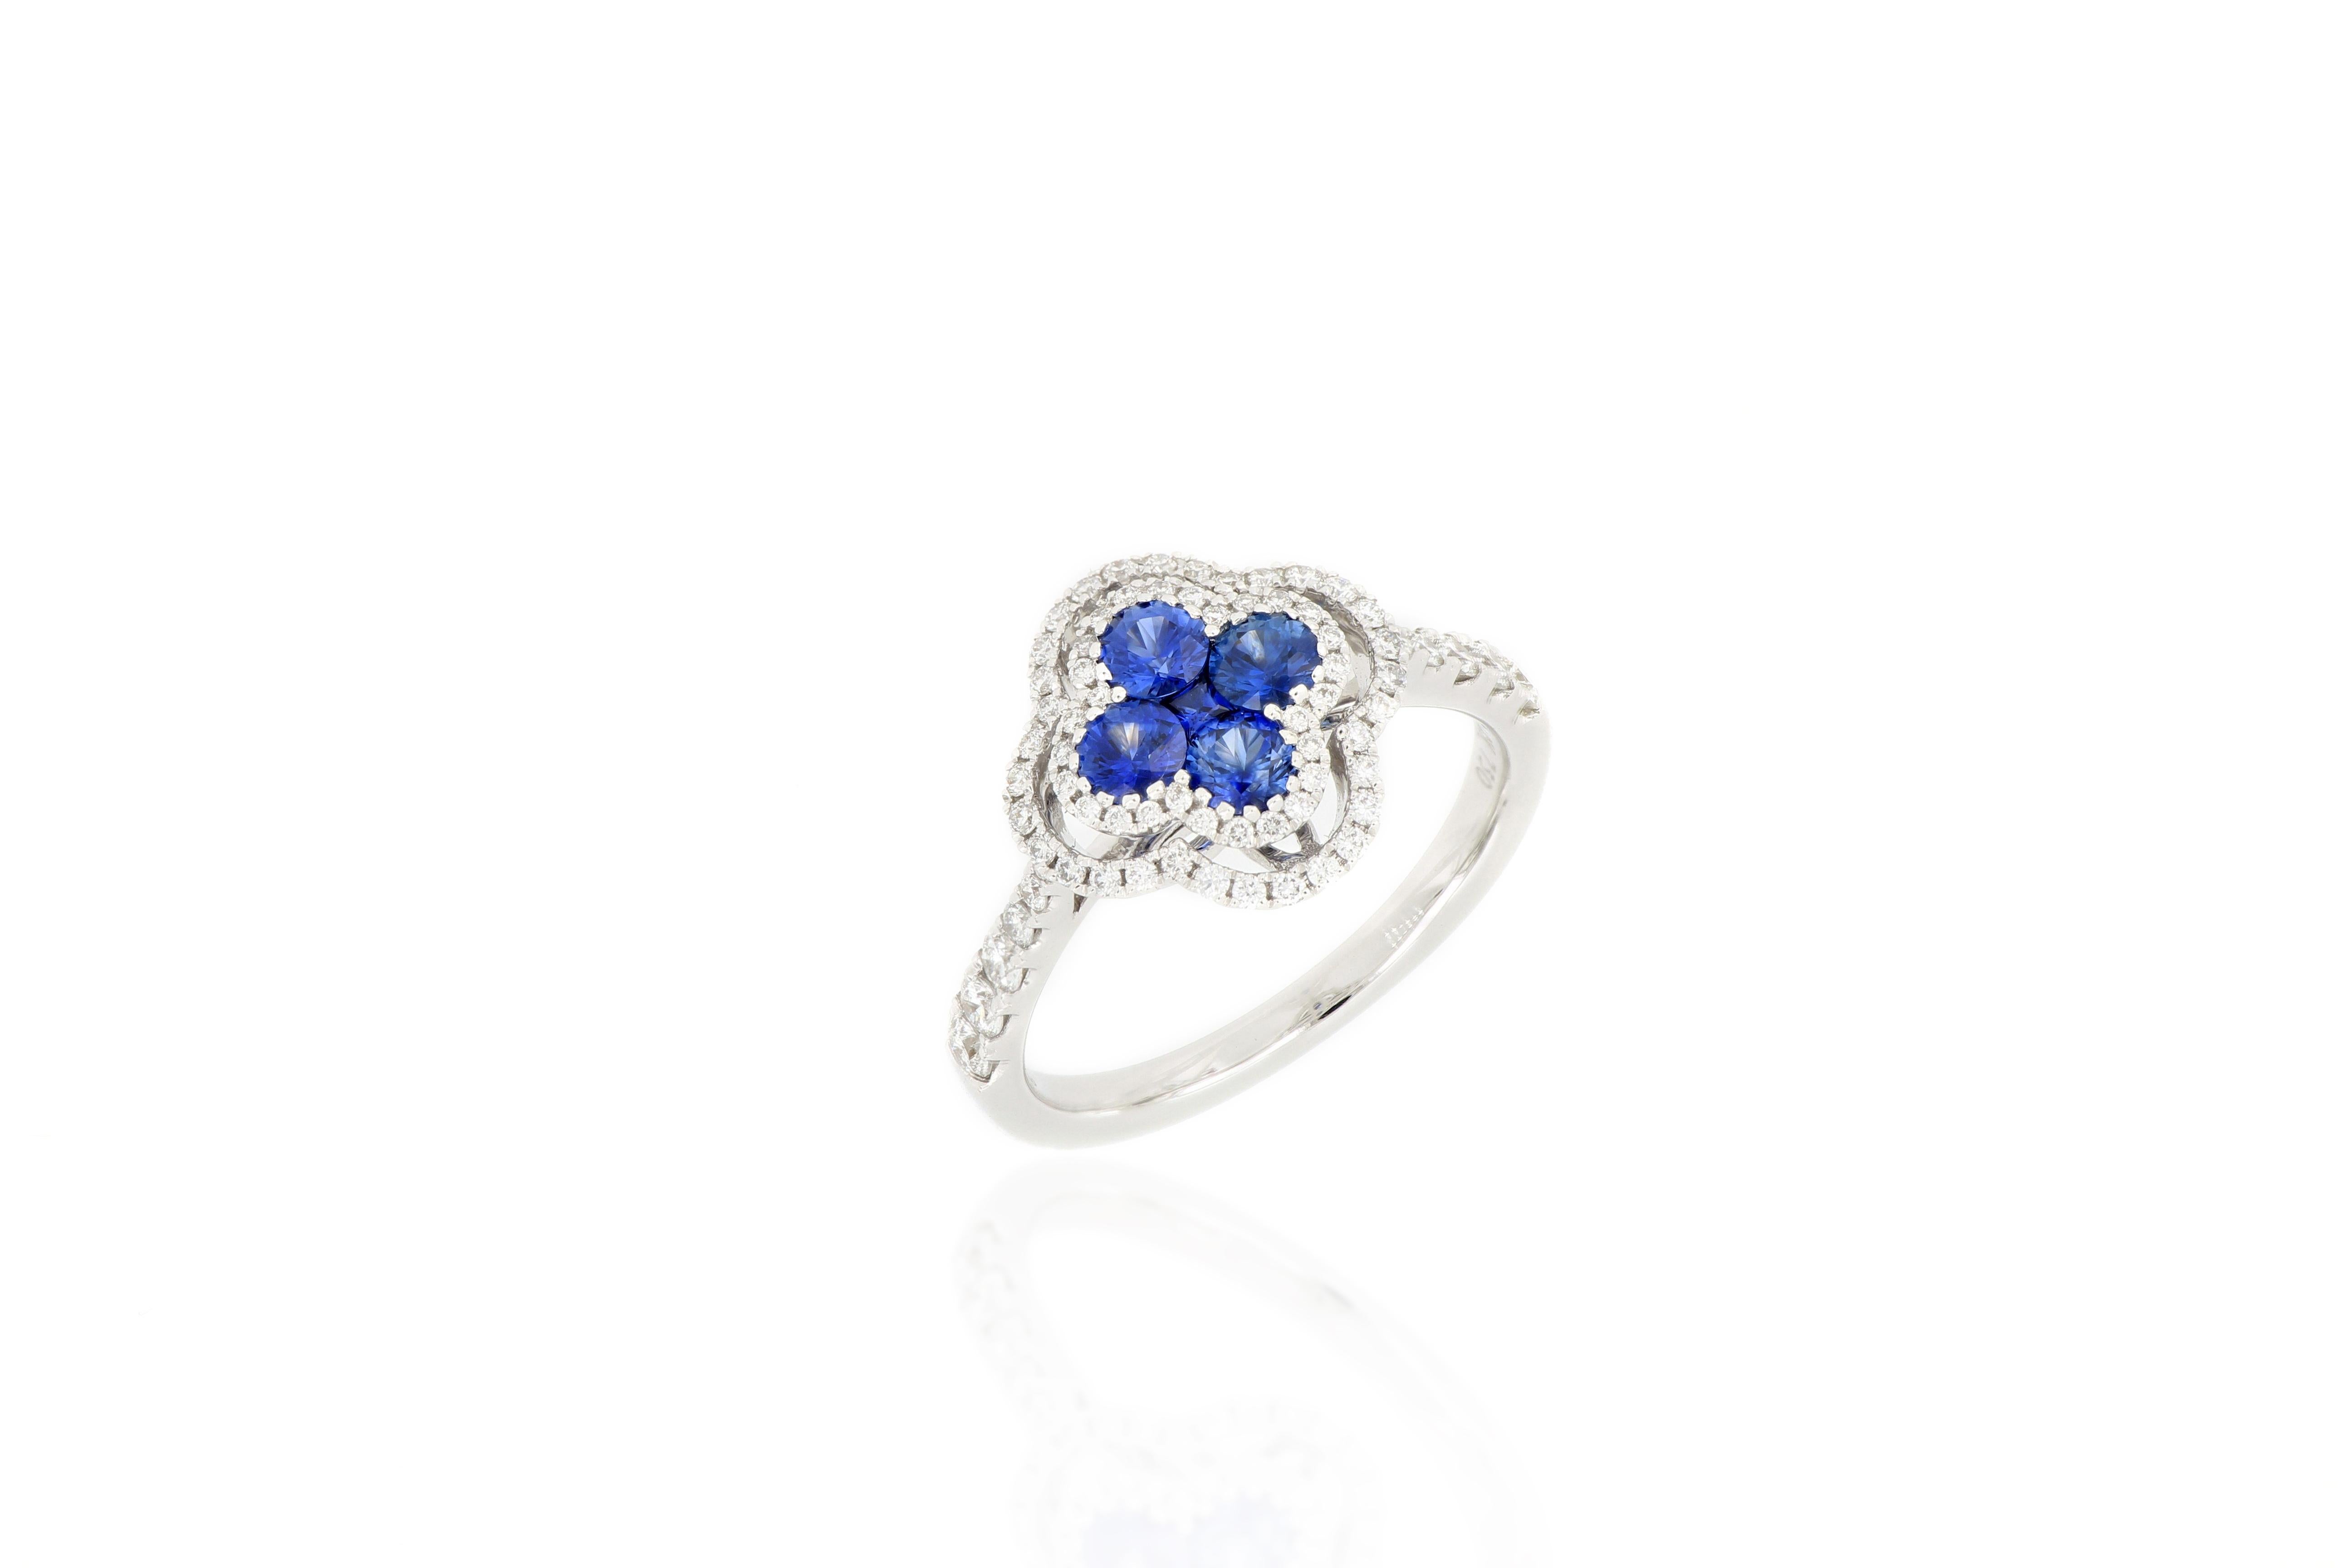 A fabulous sapphire and diamond ring. A cluster of natural sapphire arranged in the four-leaf clover pattern weighing 0.67cts, surrounded by brilliant-cut diamonds extending to the shoulders, total weighing 0.45cts, mounted in 18 karat white gold.